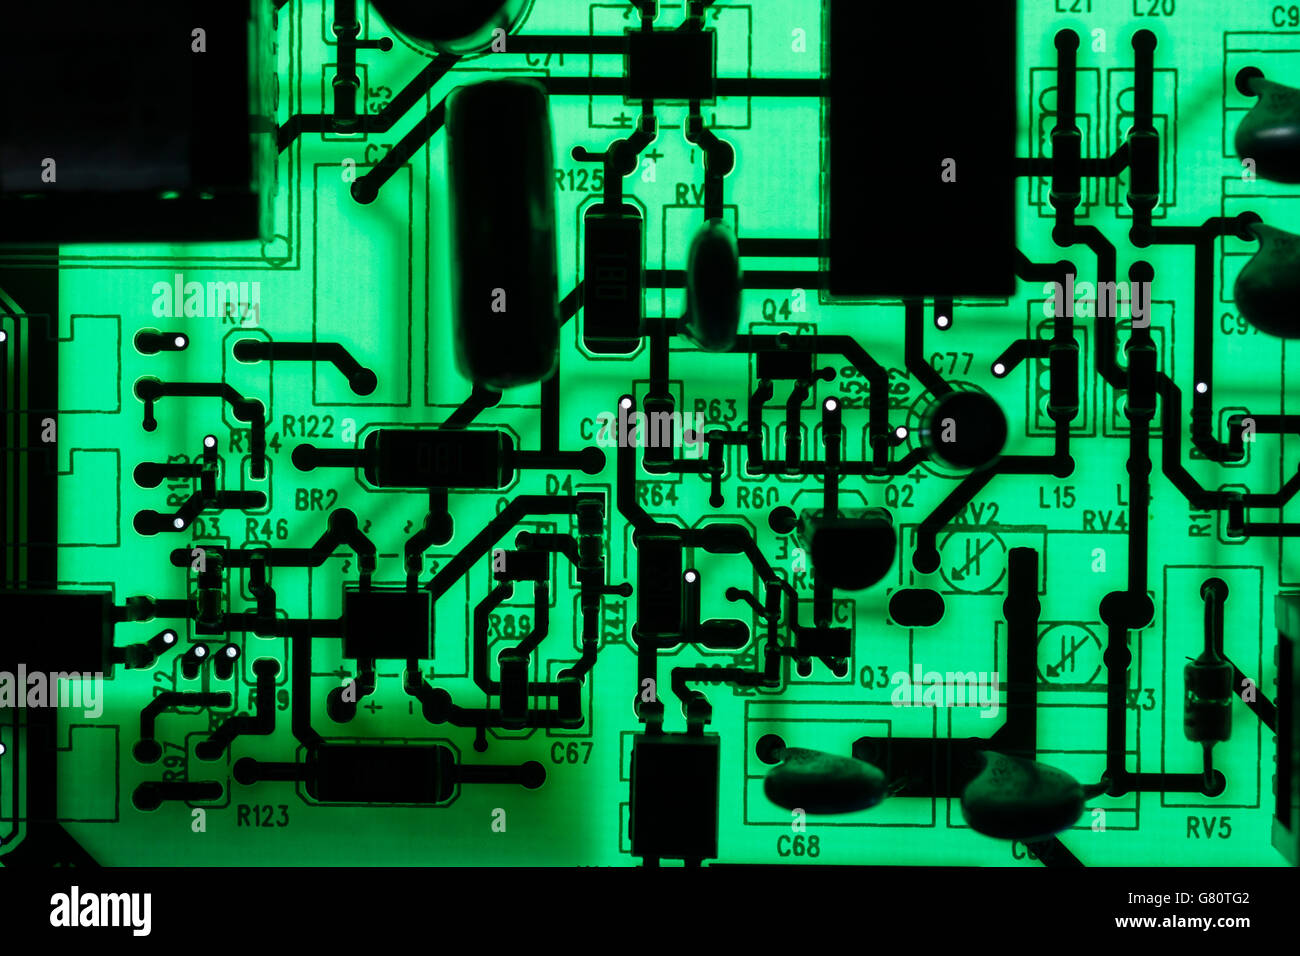 Computer technology concept. Circuit board / pcb showing components backlit with green light. Wiring inside computer, circuit close up, electronics. Stock Photo